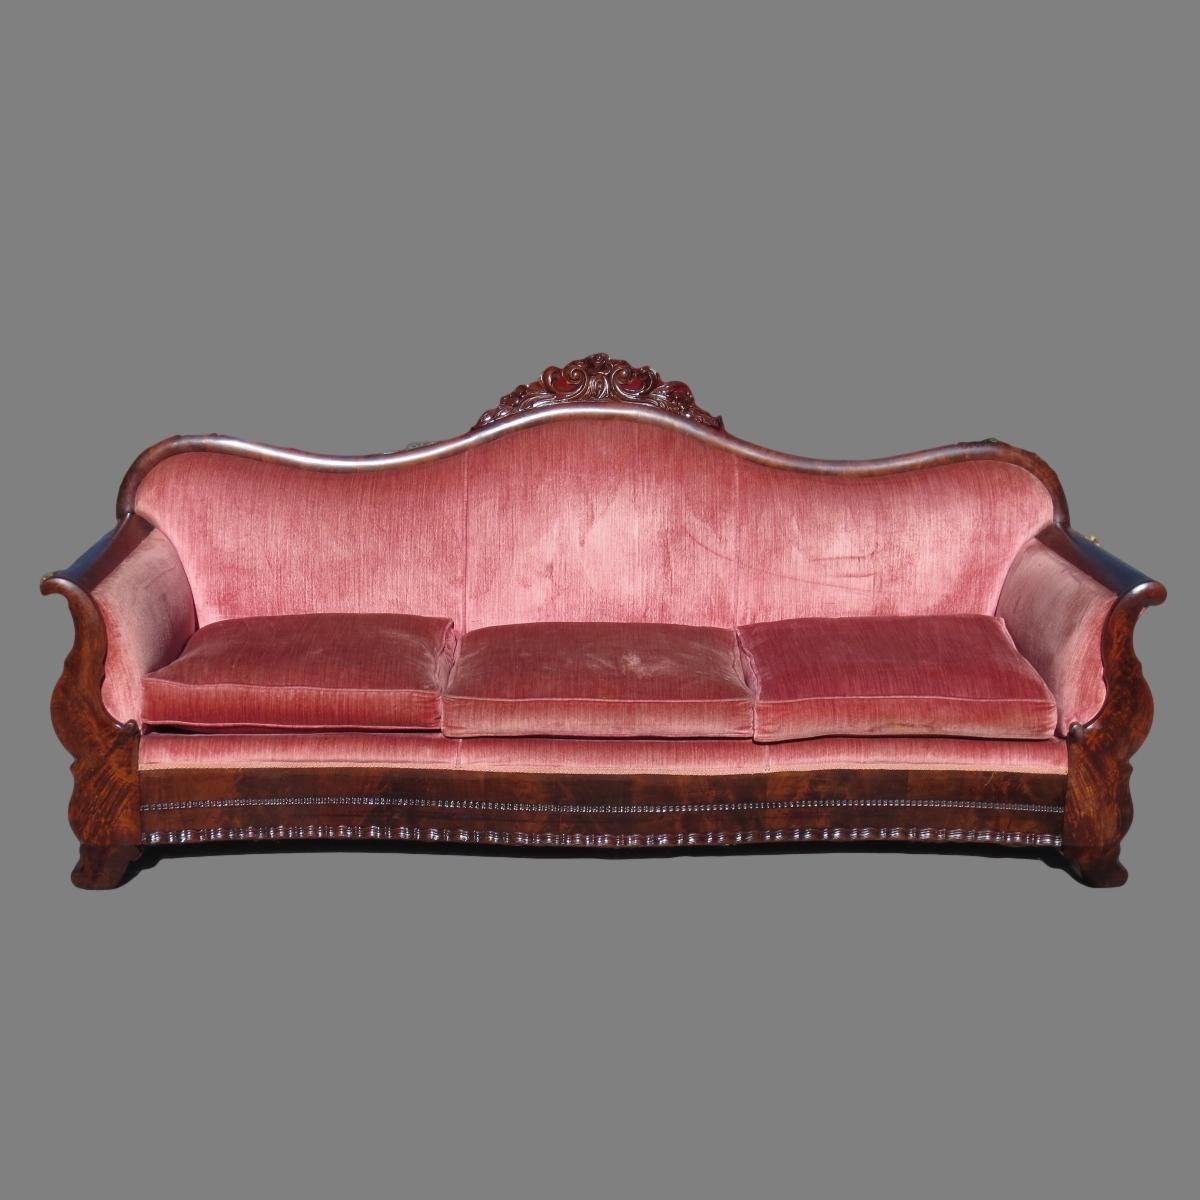 Antique Sofas And Antique Couches From Antique Furniture Mart Inside Antique Sofa Chairs (View 6 of 20)